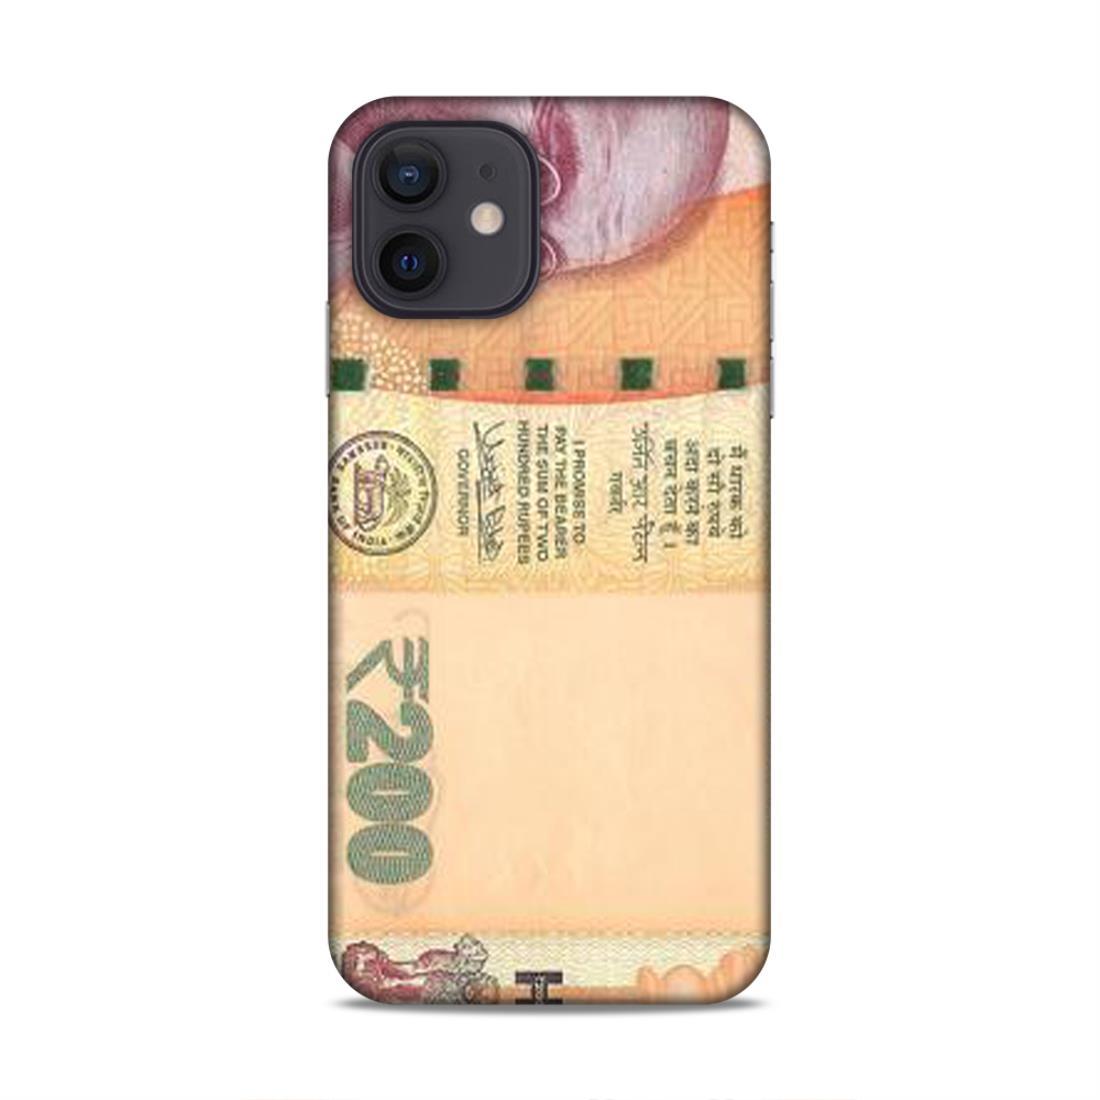 Rs 200 Currency Note iPhone 12 Phone Case Cover